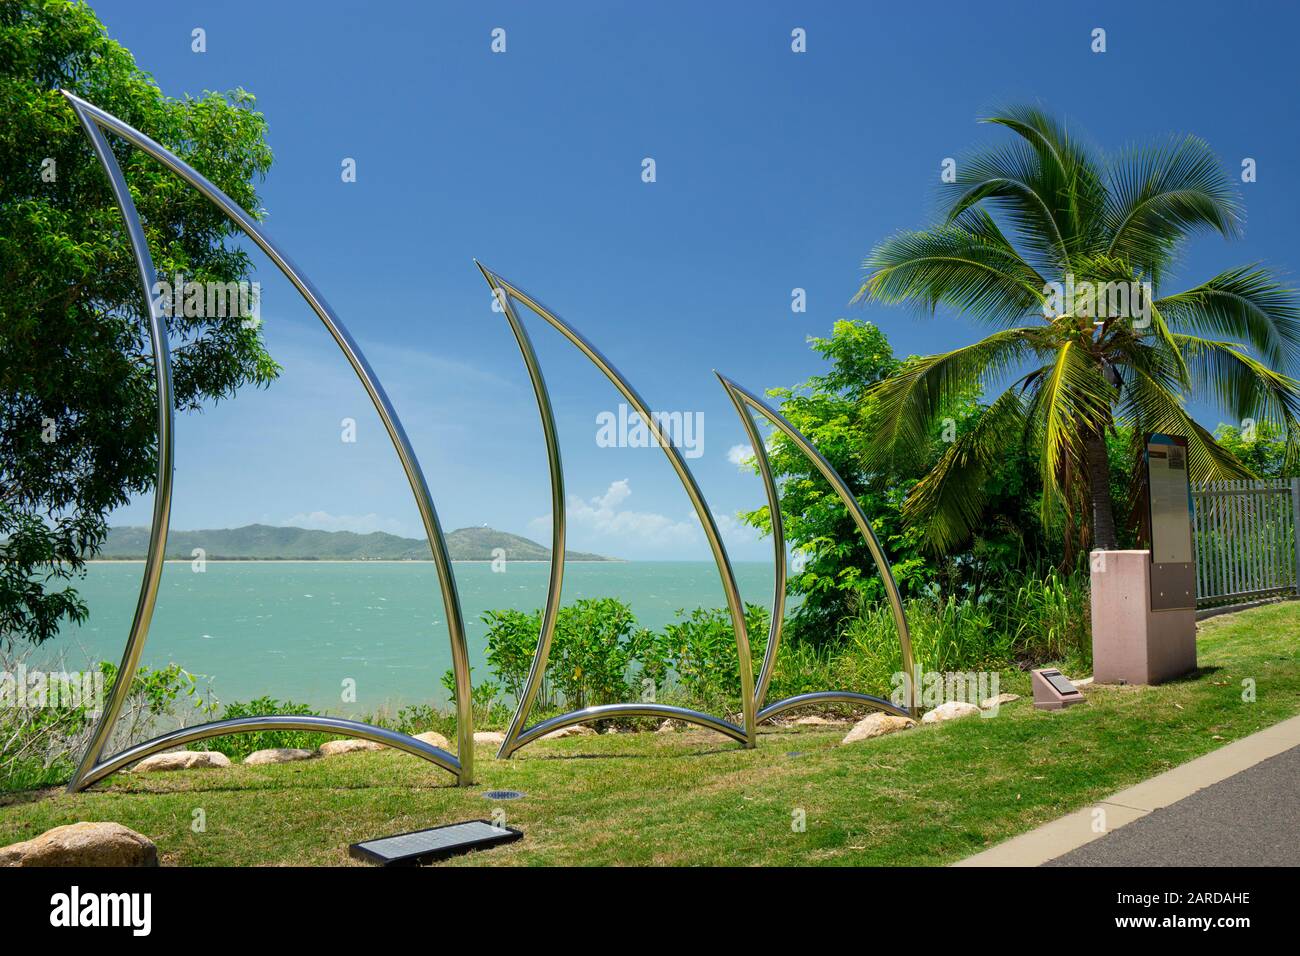 Sculpture titled 'First Contact' depicting ships' sails, part of public art works, Kissing Point, Townsville, Queensland Stock Photo